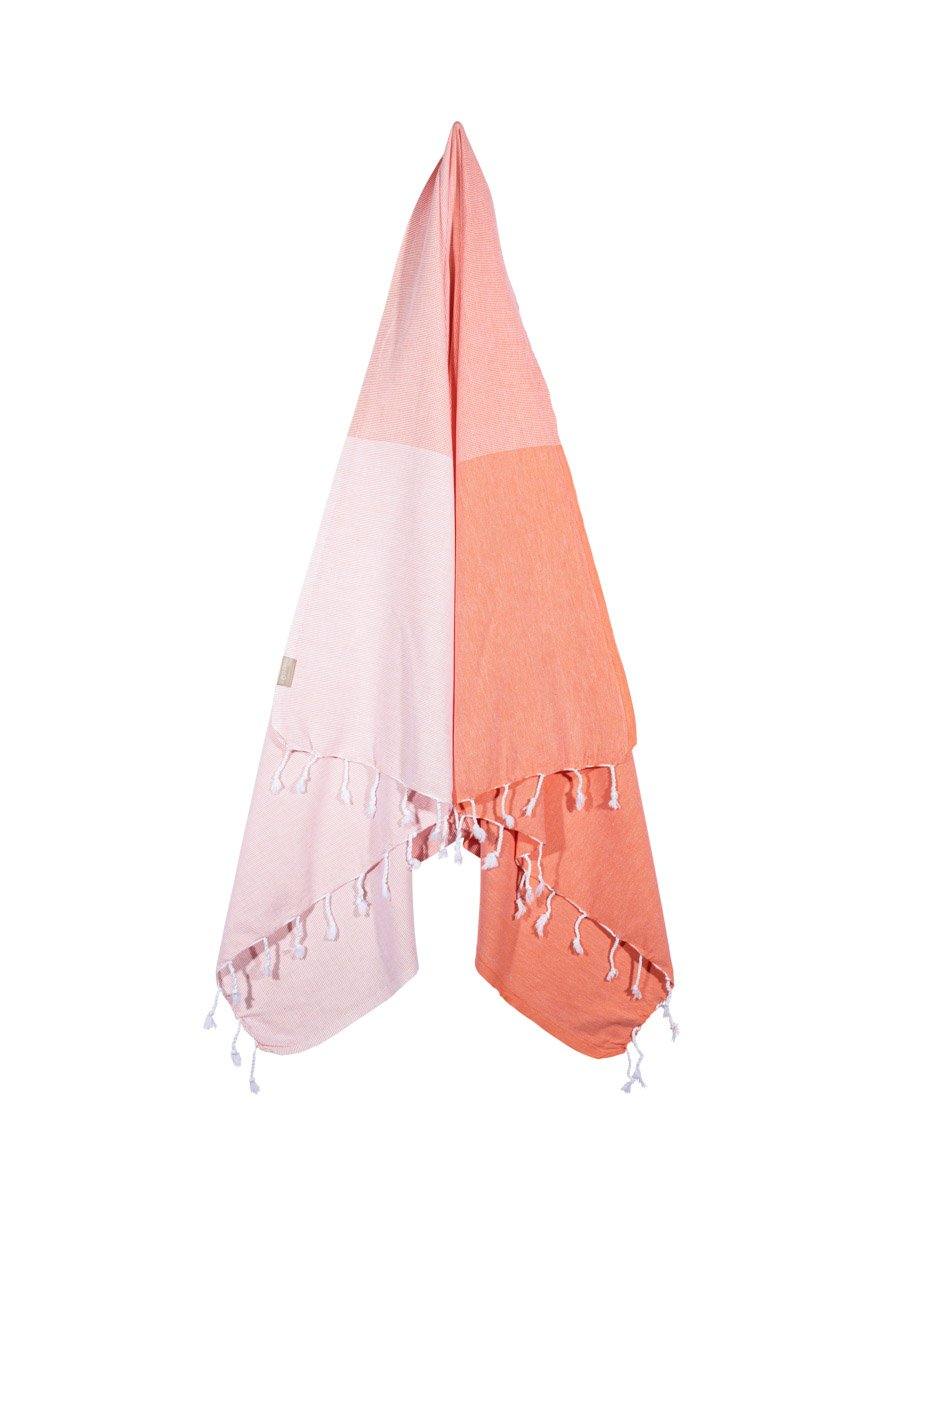 Dune - Coral Lightweight Quick Drying Towel Hanging 